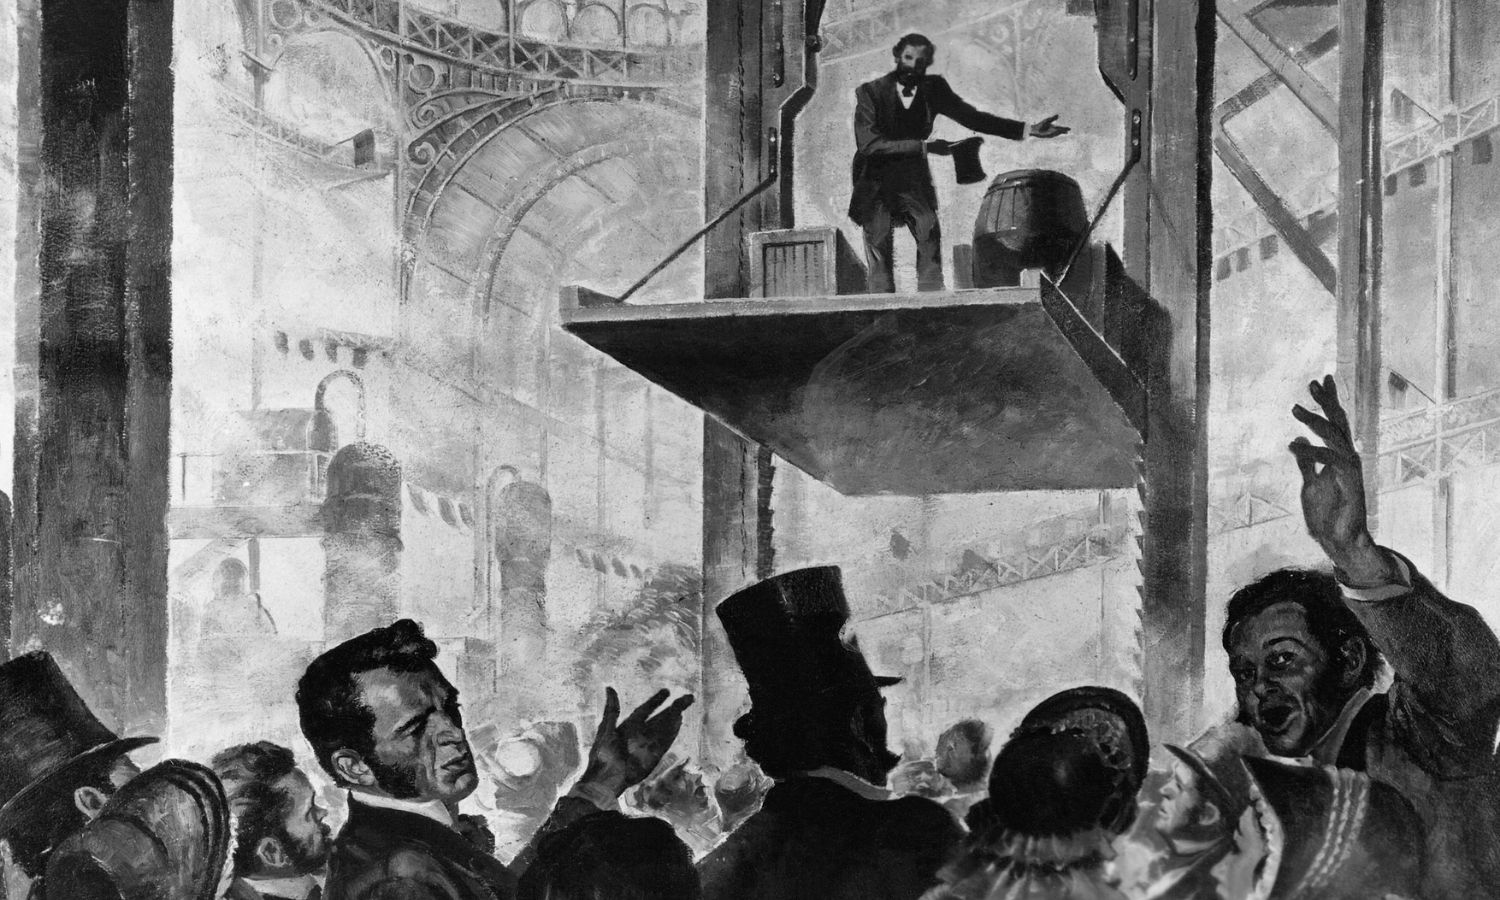 OTD in 1861: Inventor Elisha Otis acquired a patent for a steam engine for elevators.